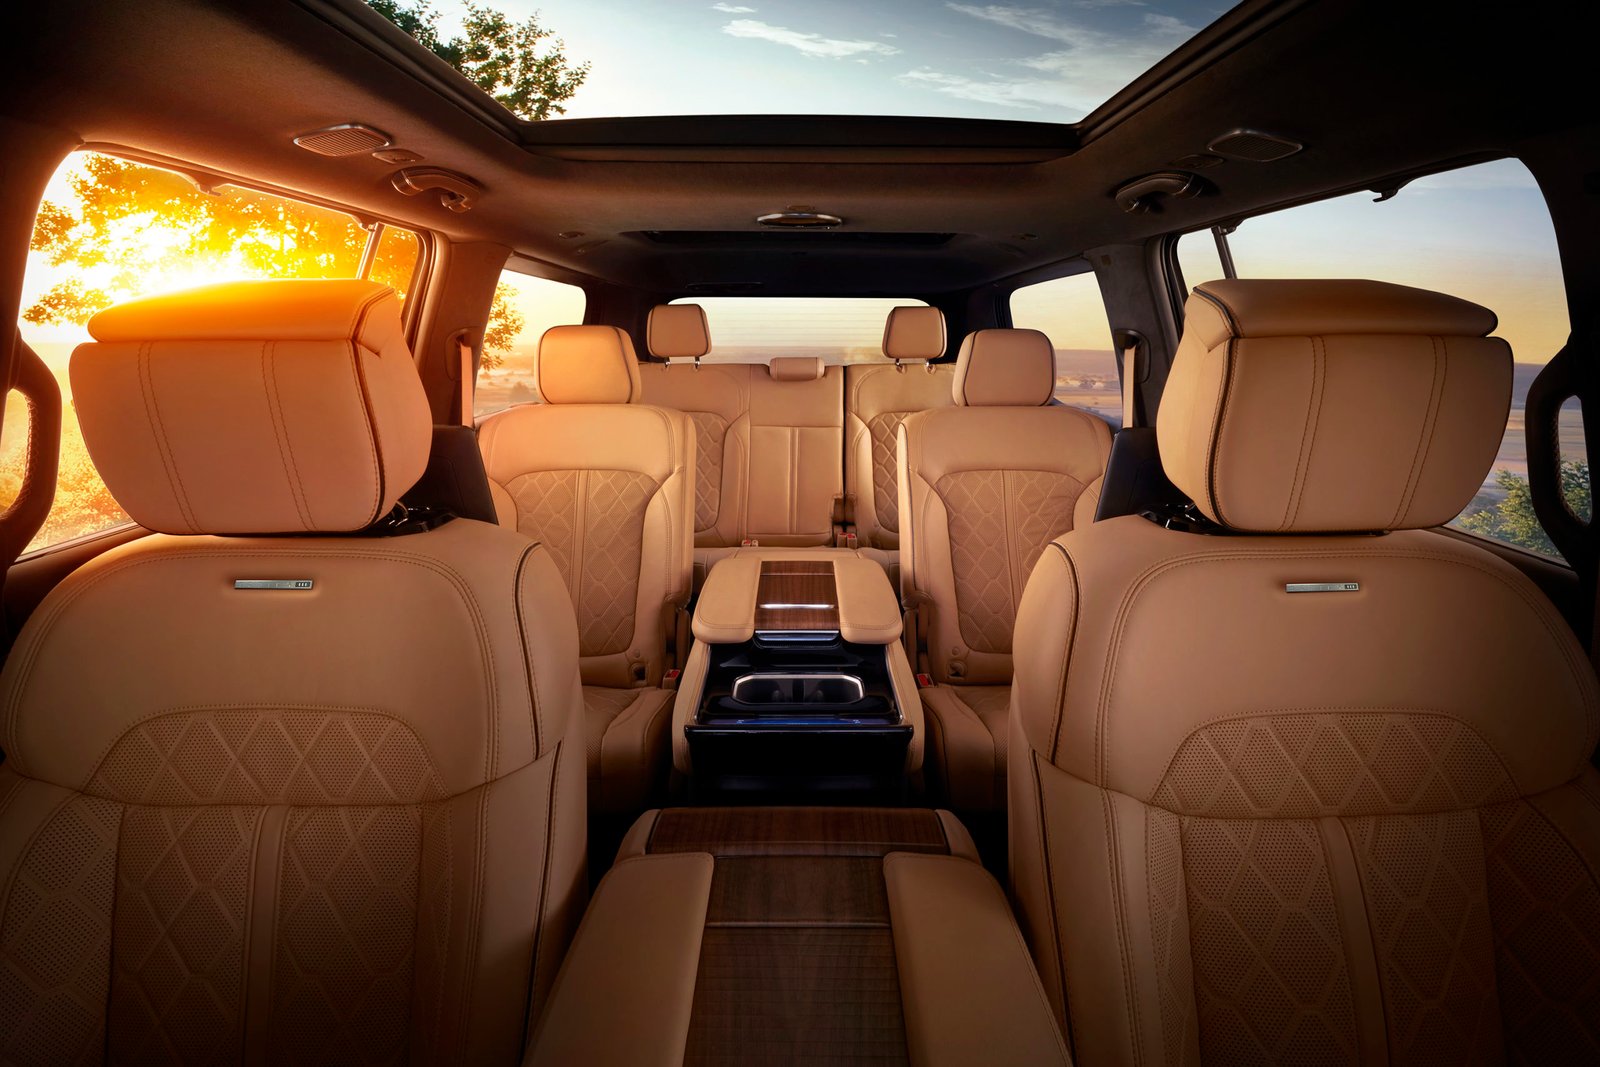 All-new 2022 Grand Wagoneer features hand-wrapped, quilited Palermo leather seats in all three rows.